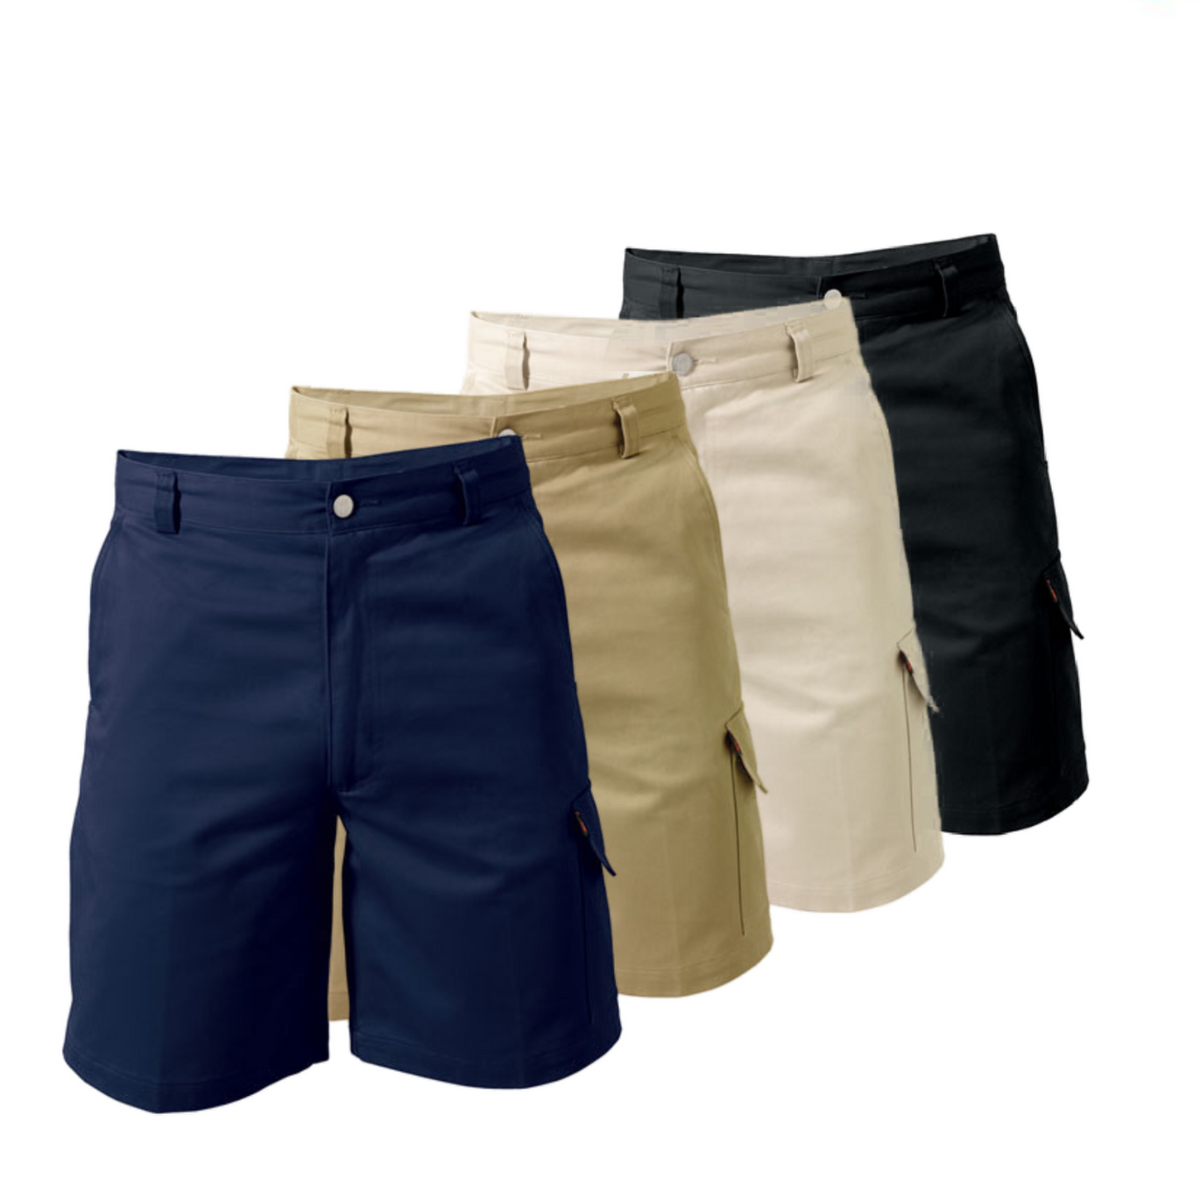 KingGee Mens New G'S Workers Short Work Shorts Cargo Pockets Repels Water K17100-Collins Clothing Co